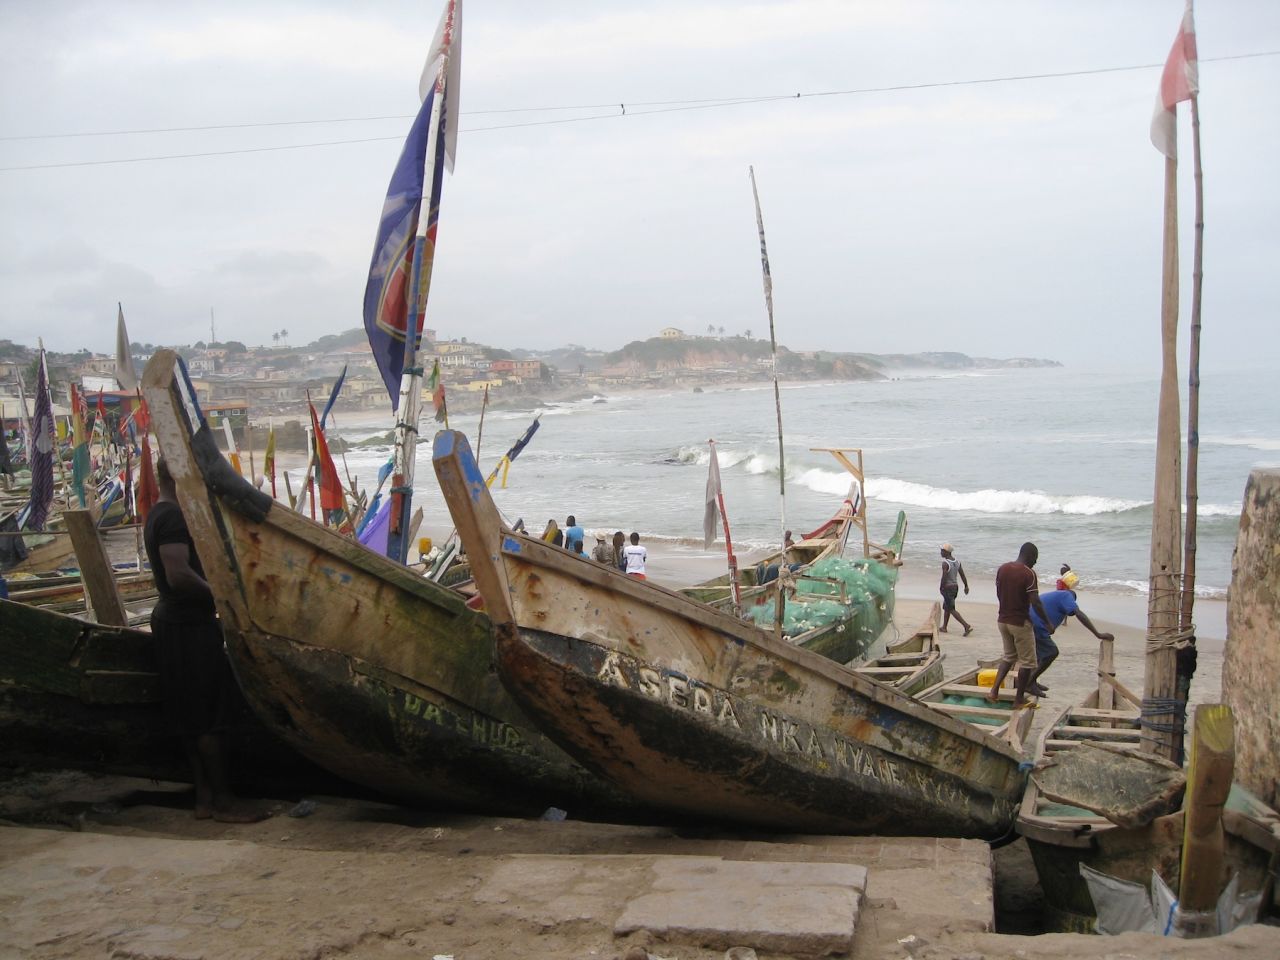 Fishing boats on the beach outside the Door of No Return.